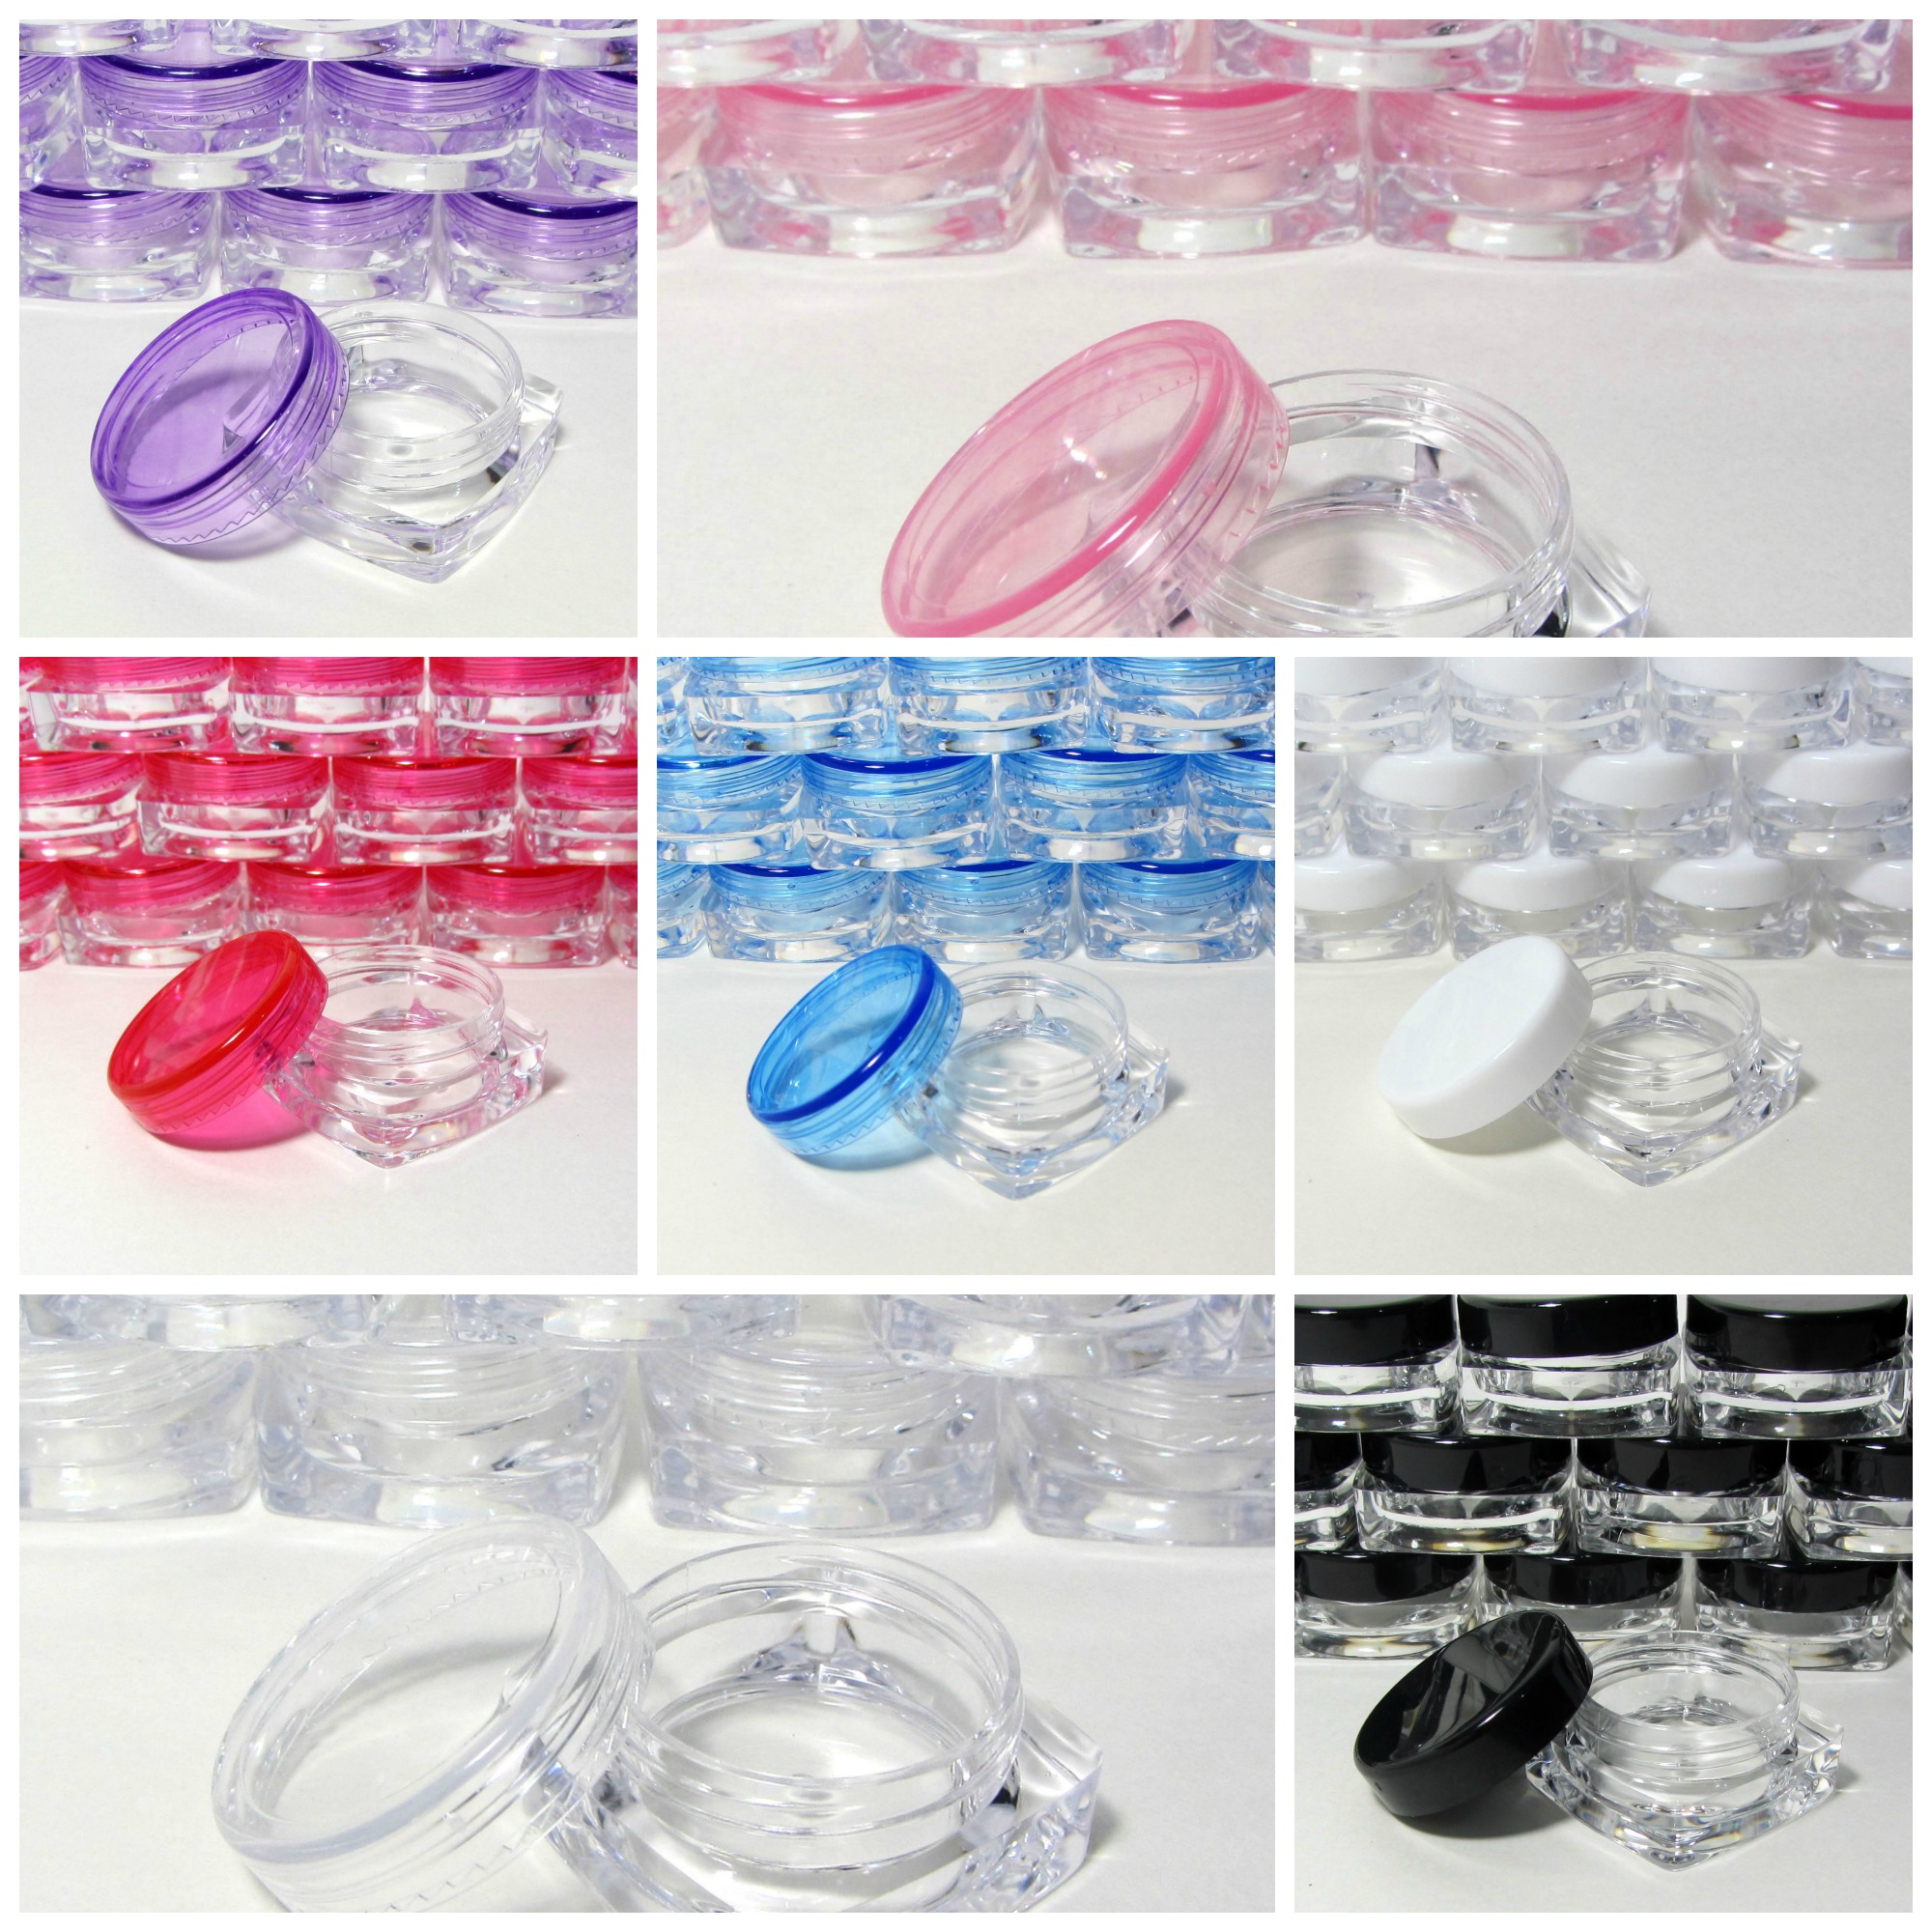 Cosmetic Jars Mini Square Beauty Containers - 3 Ml (Purple / Pink / Red / Blue / White / Clear / Black Cap)